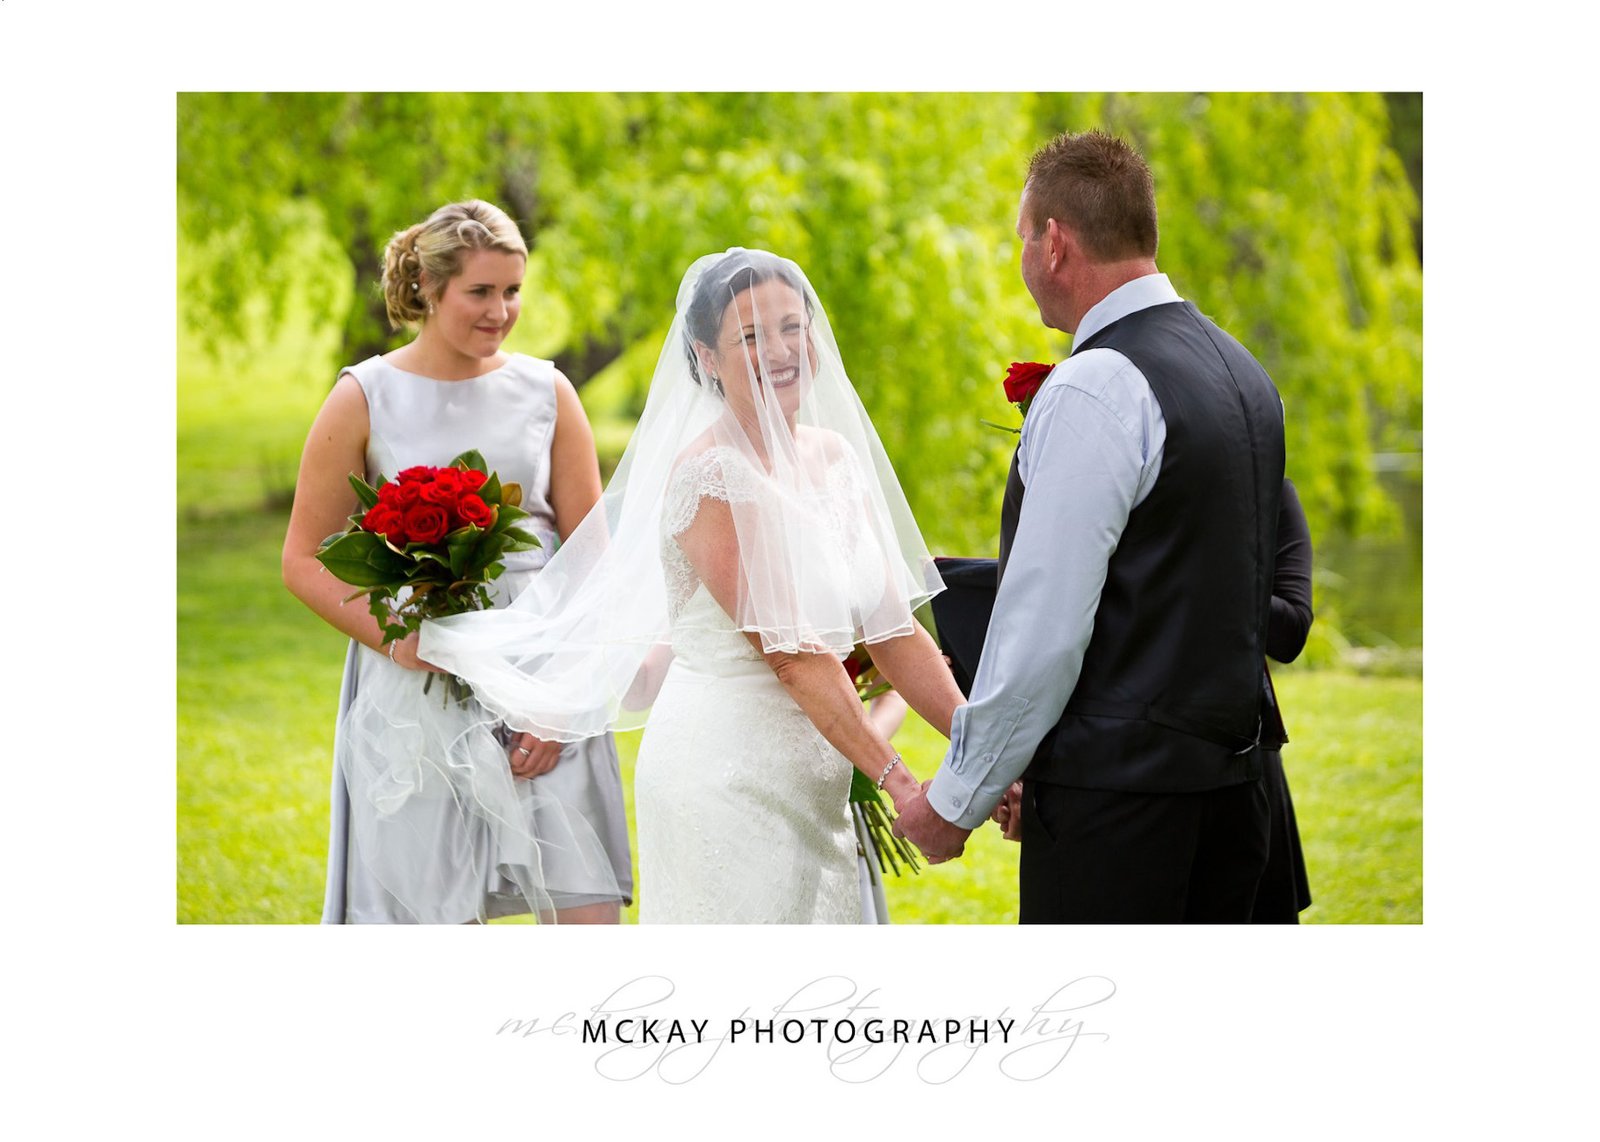 Bride smiling during wedding ceremony at Briars